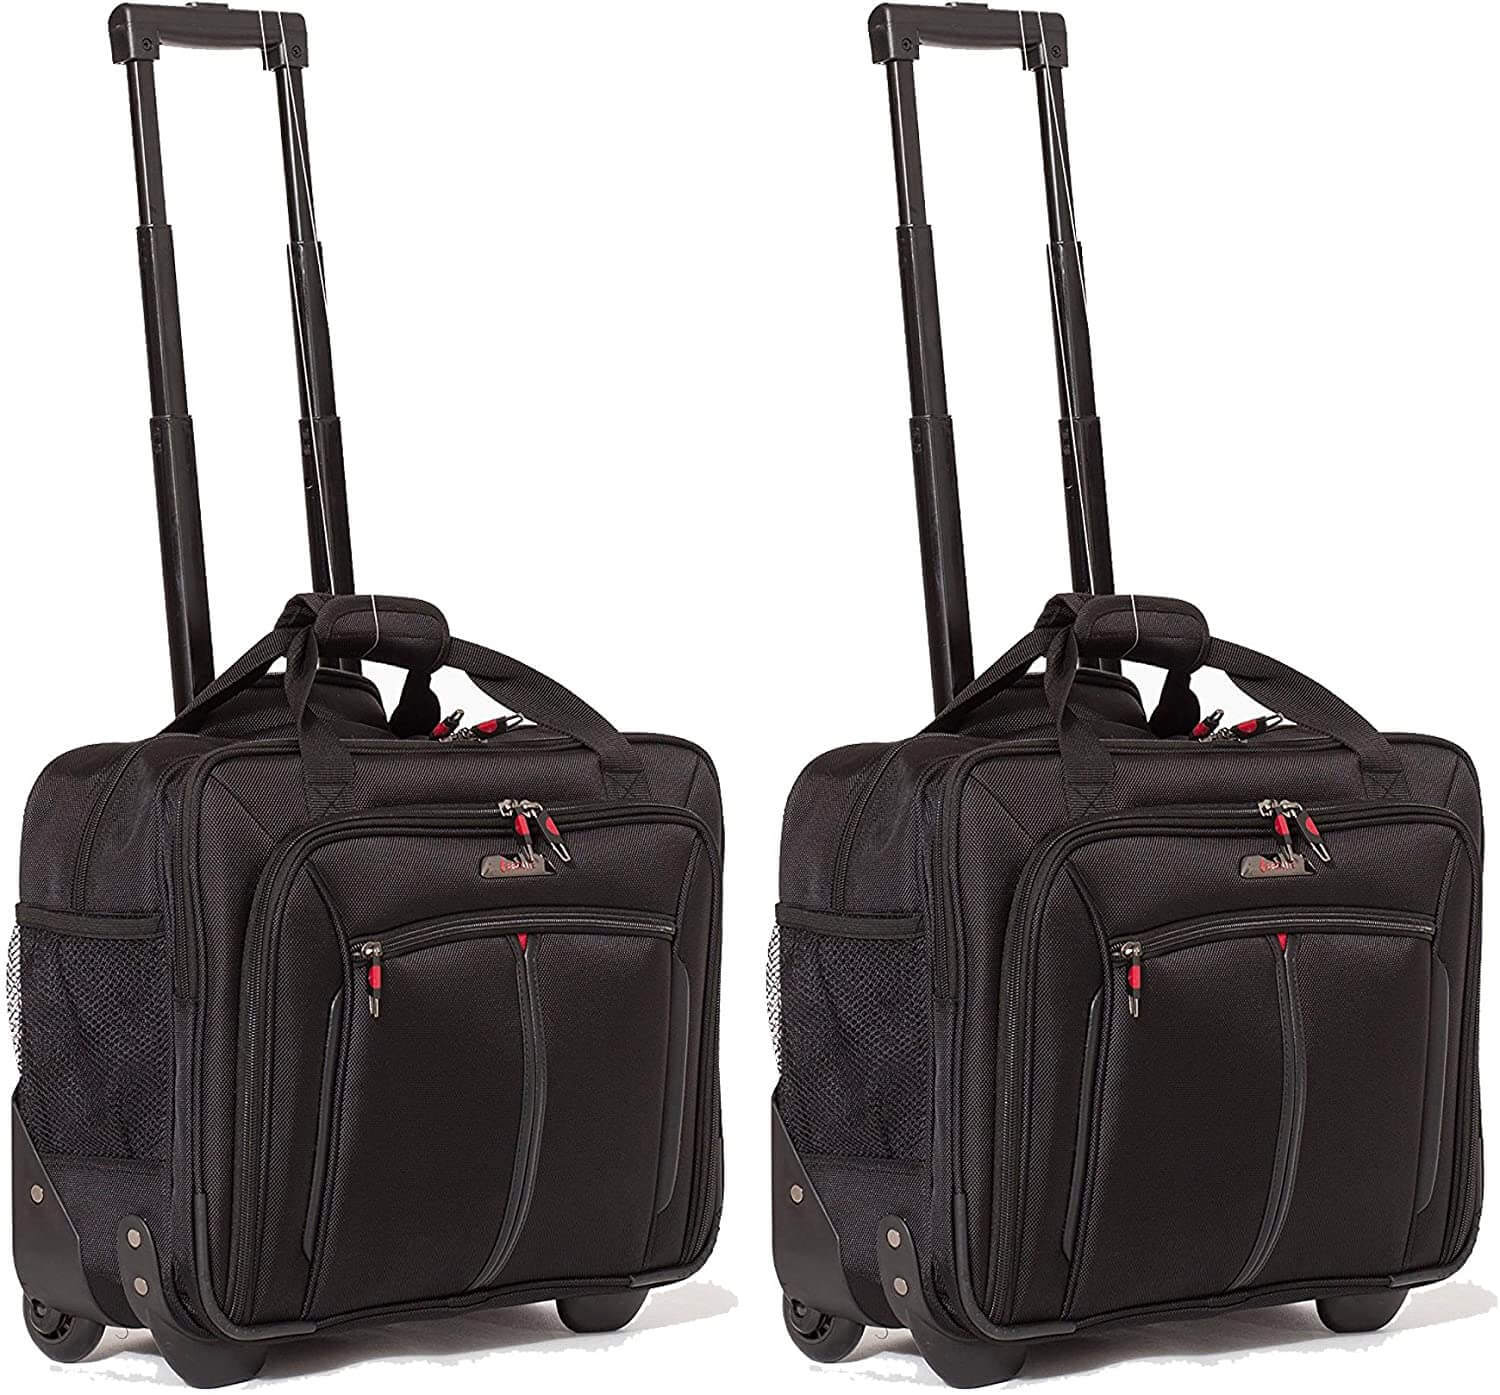 A carry-on suitcase with a click-on laptop case